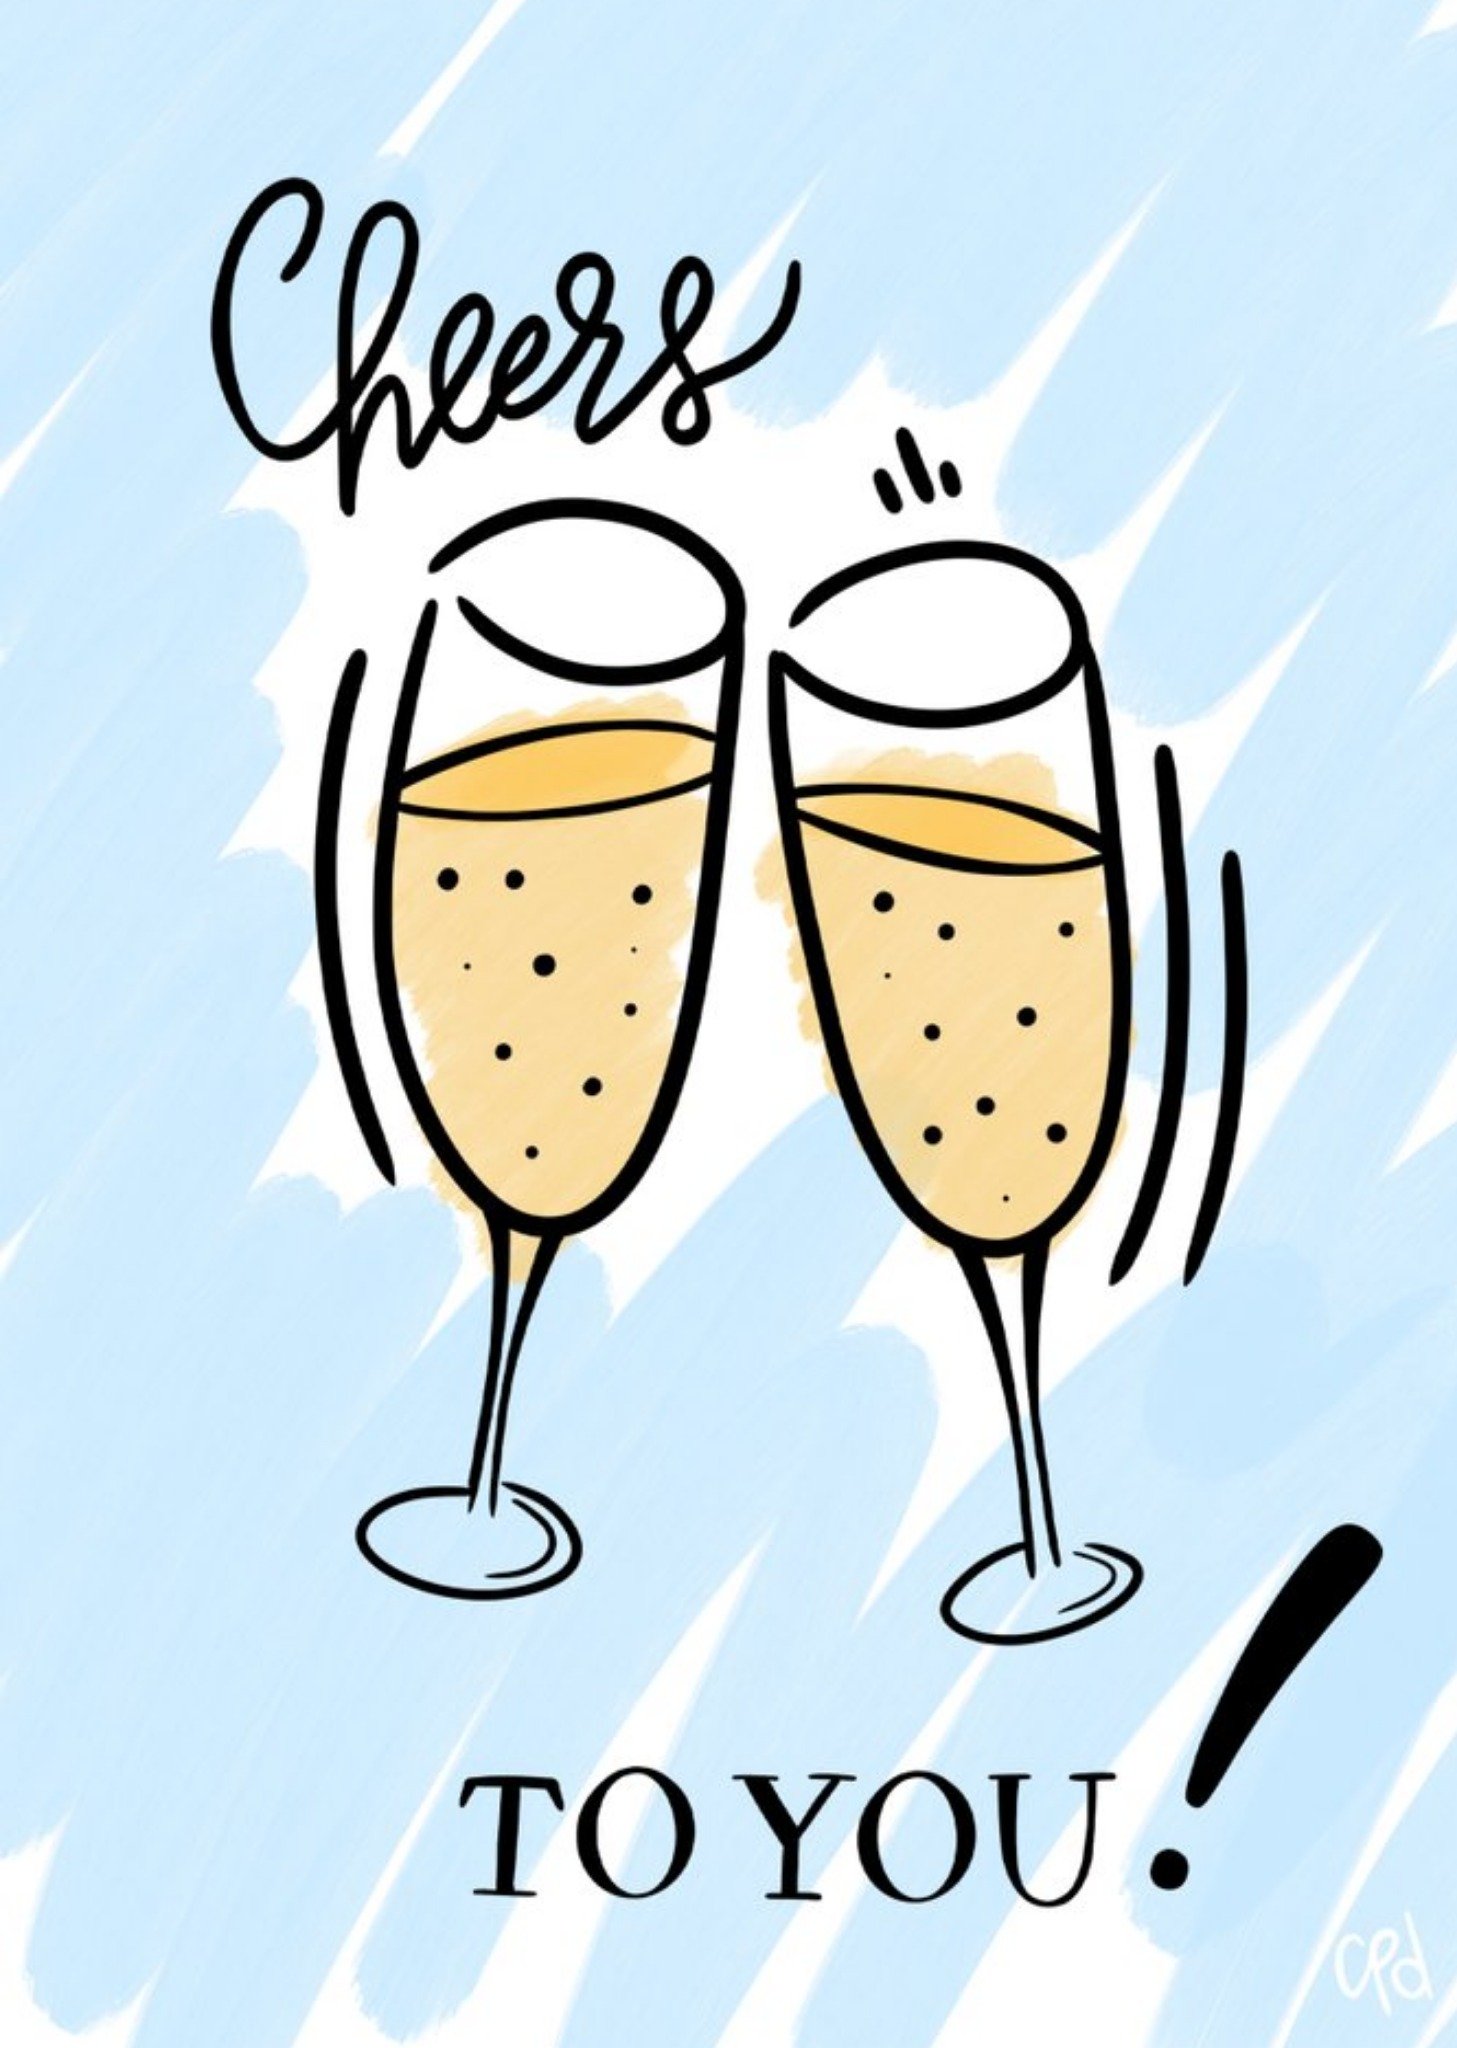 Moonpig Bright Fun Design Champagne Flutes Cheers To You Card, Large